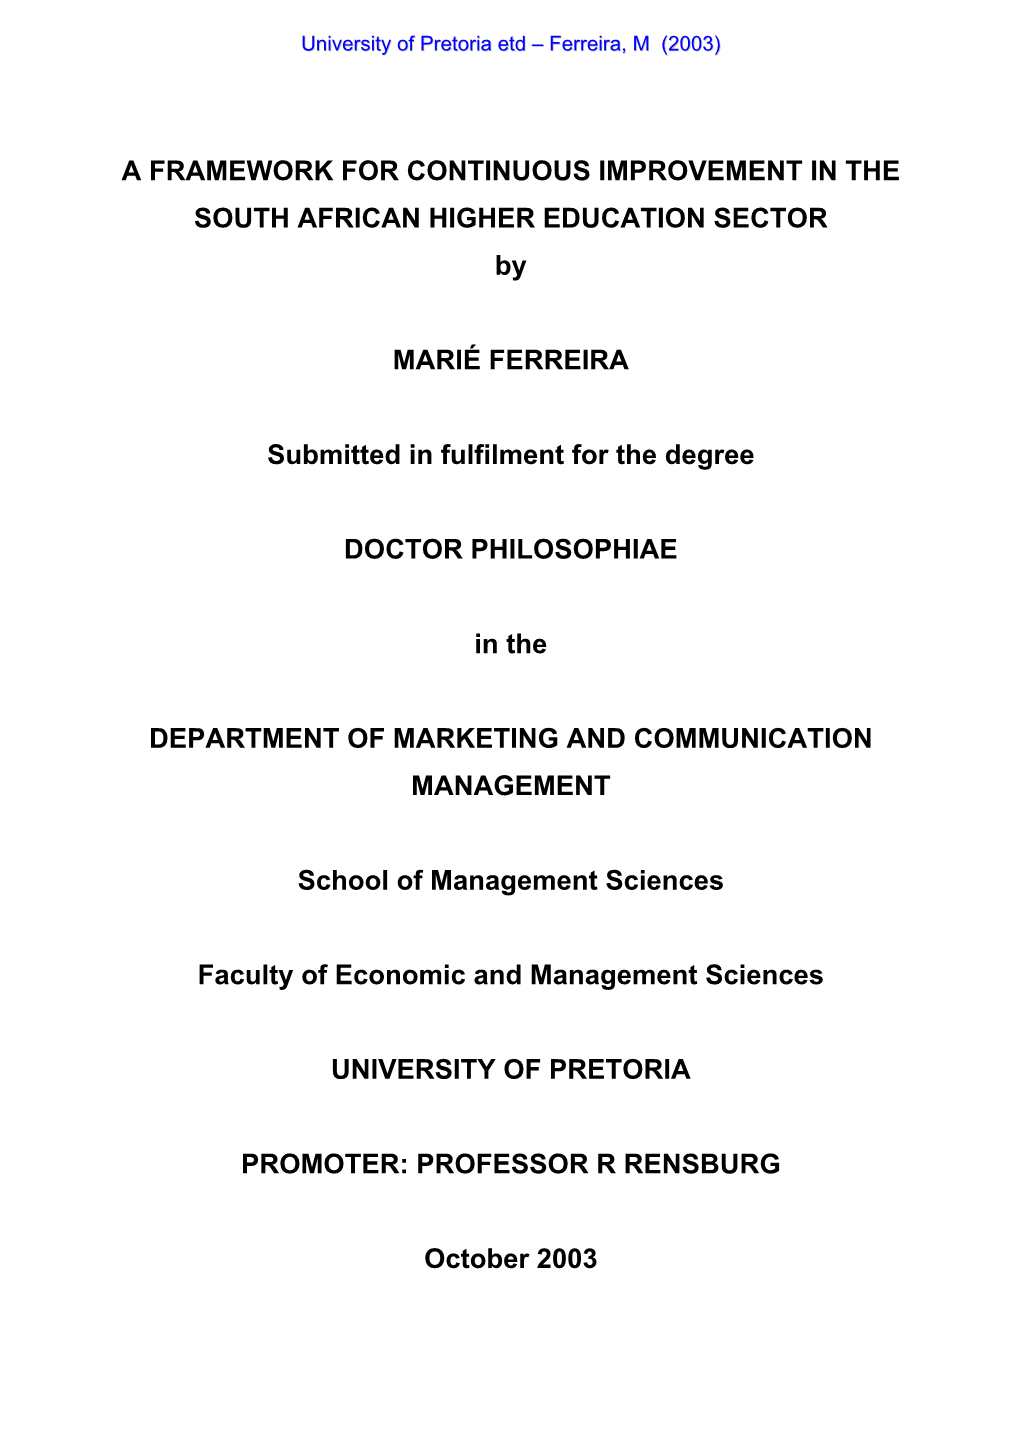 A FRAMEWORK for CONTINUOUS IMPROVEMENT in the SOUTH AFRICAN HIGHER EDUCATION SECTOR By